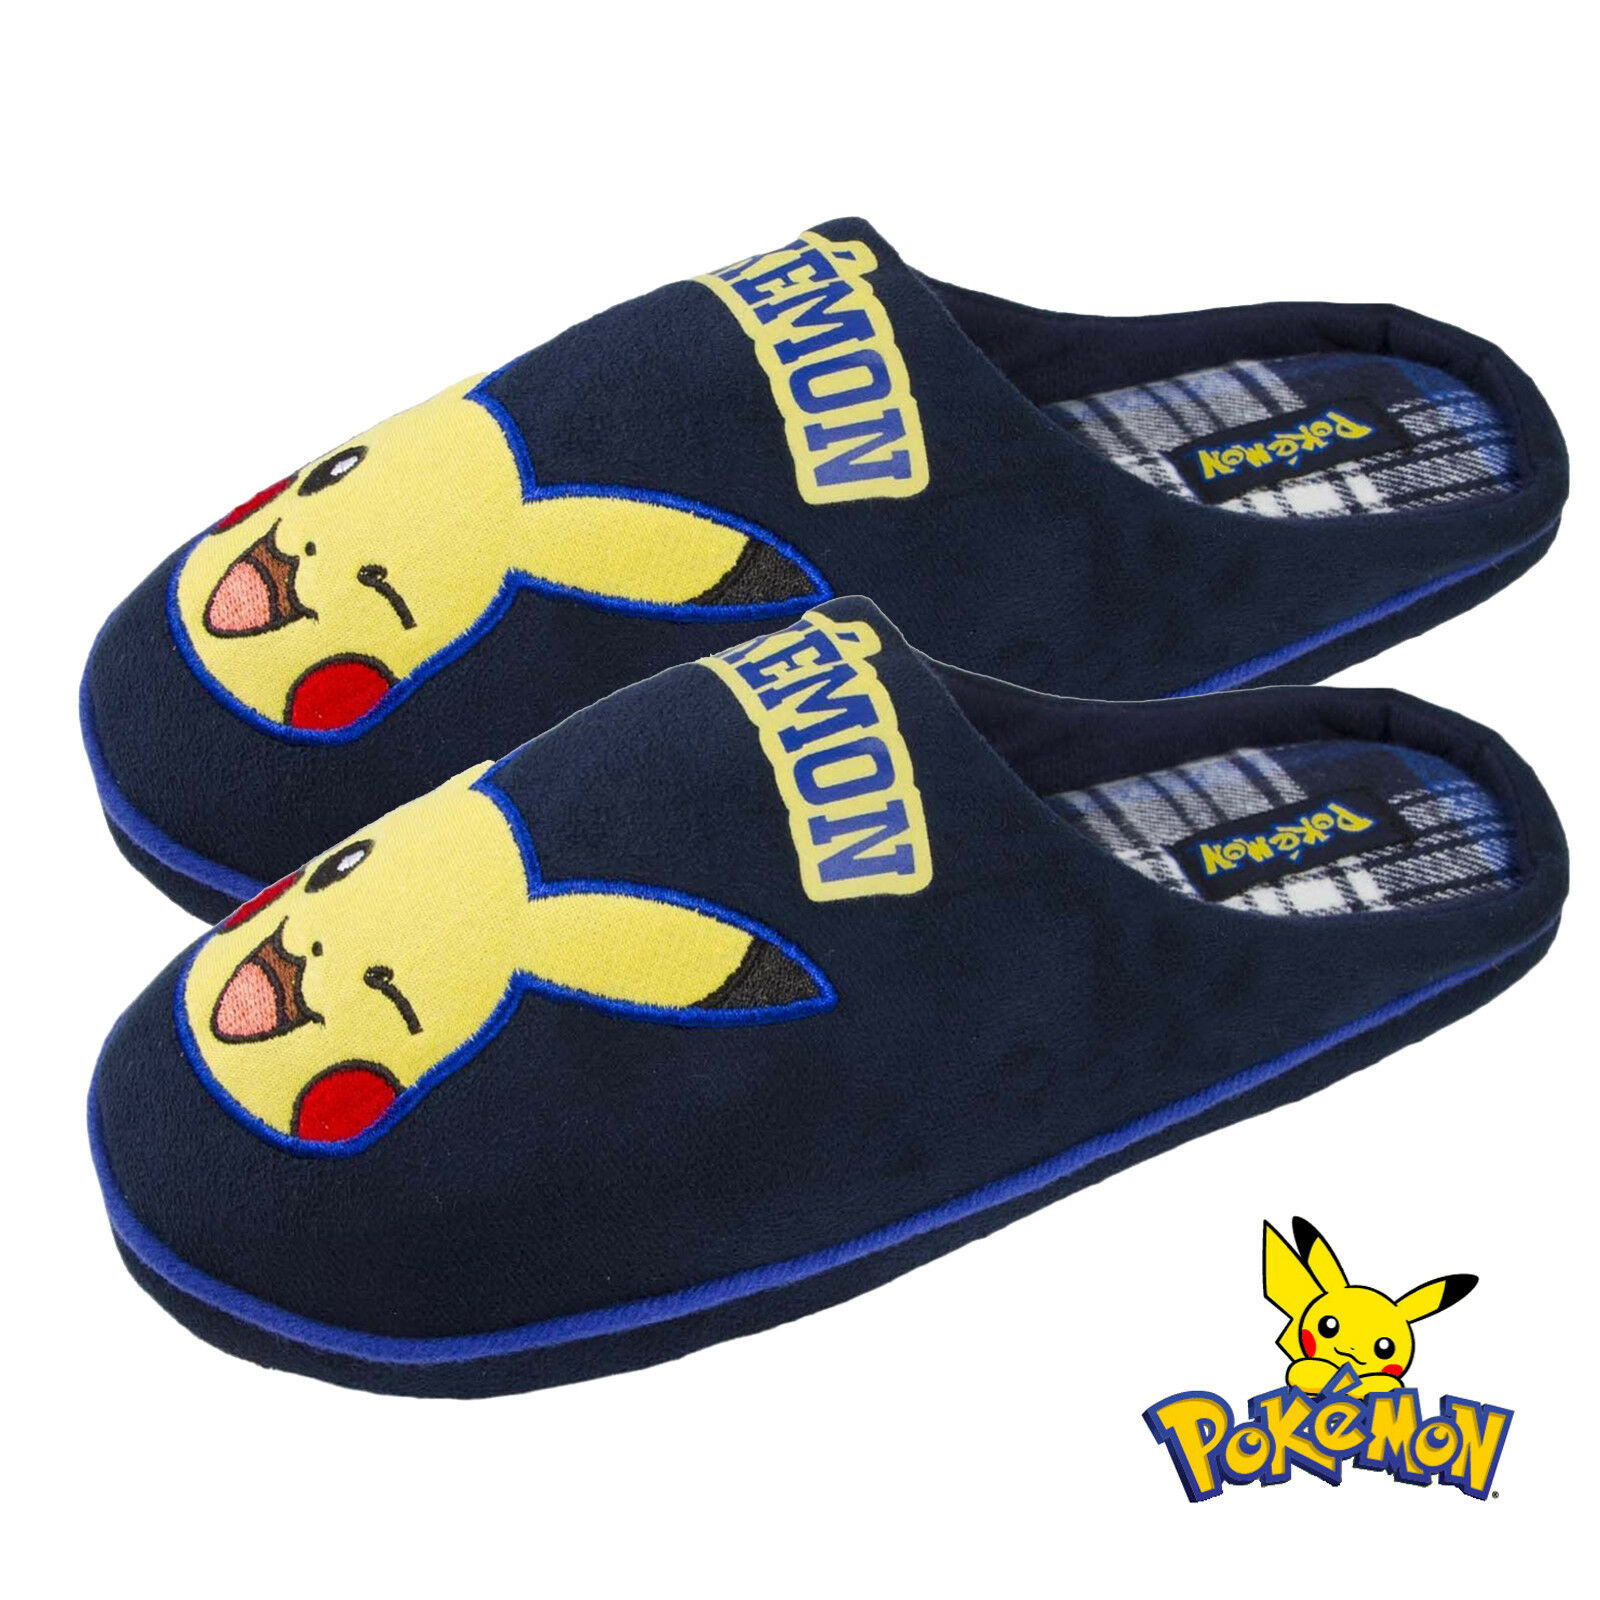 Mens Pokemon Slippers Pikachu Comfort Mules Novelty Indoort Shoes Gift Boys Size